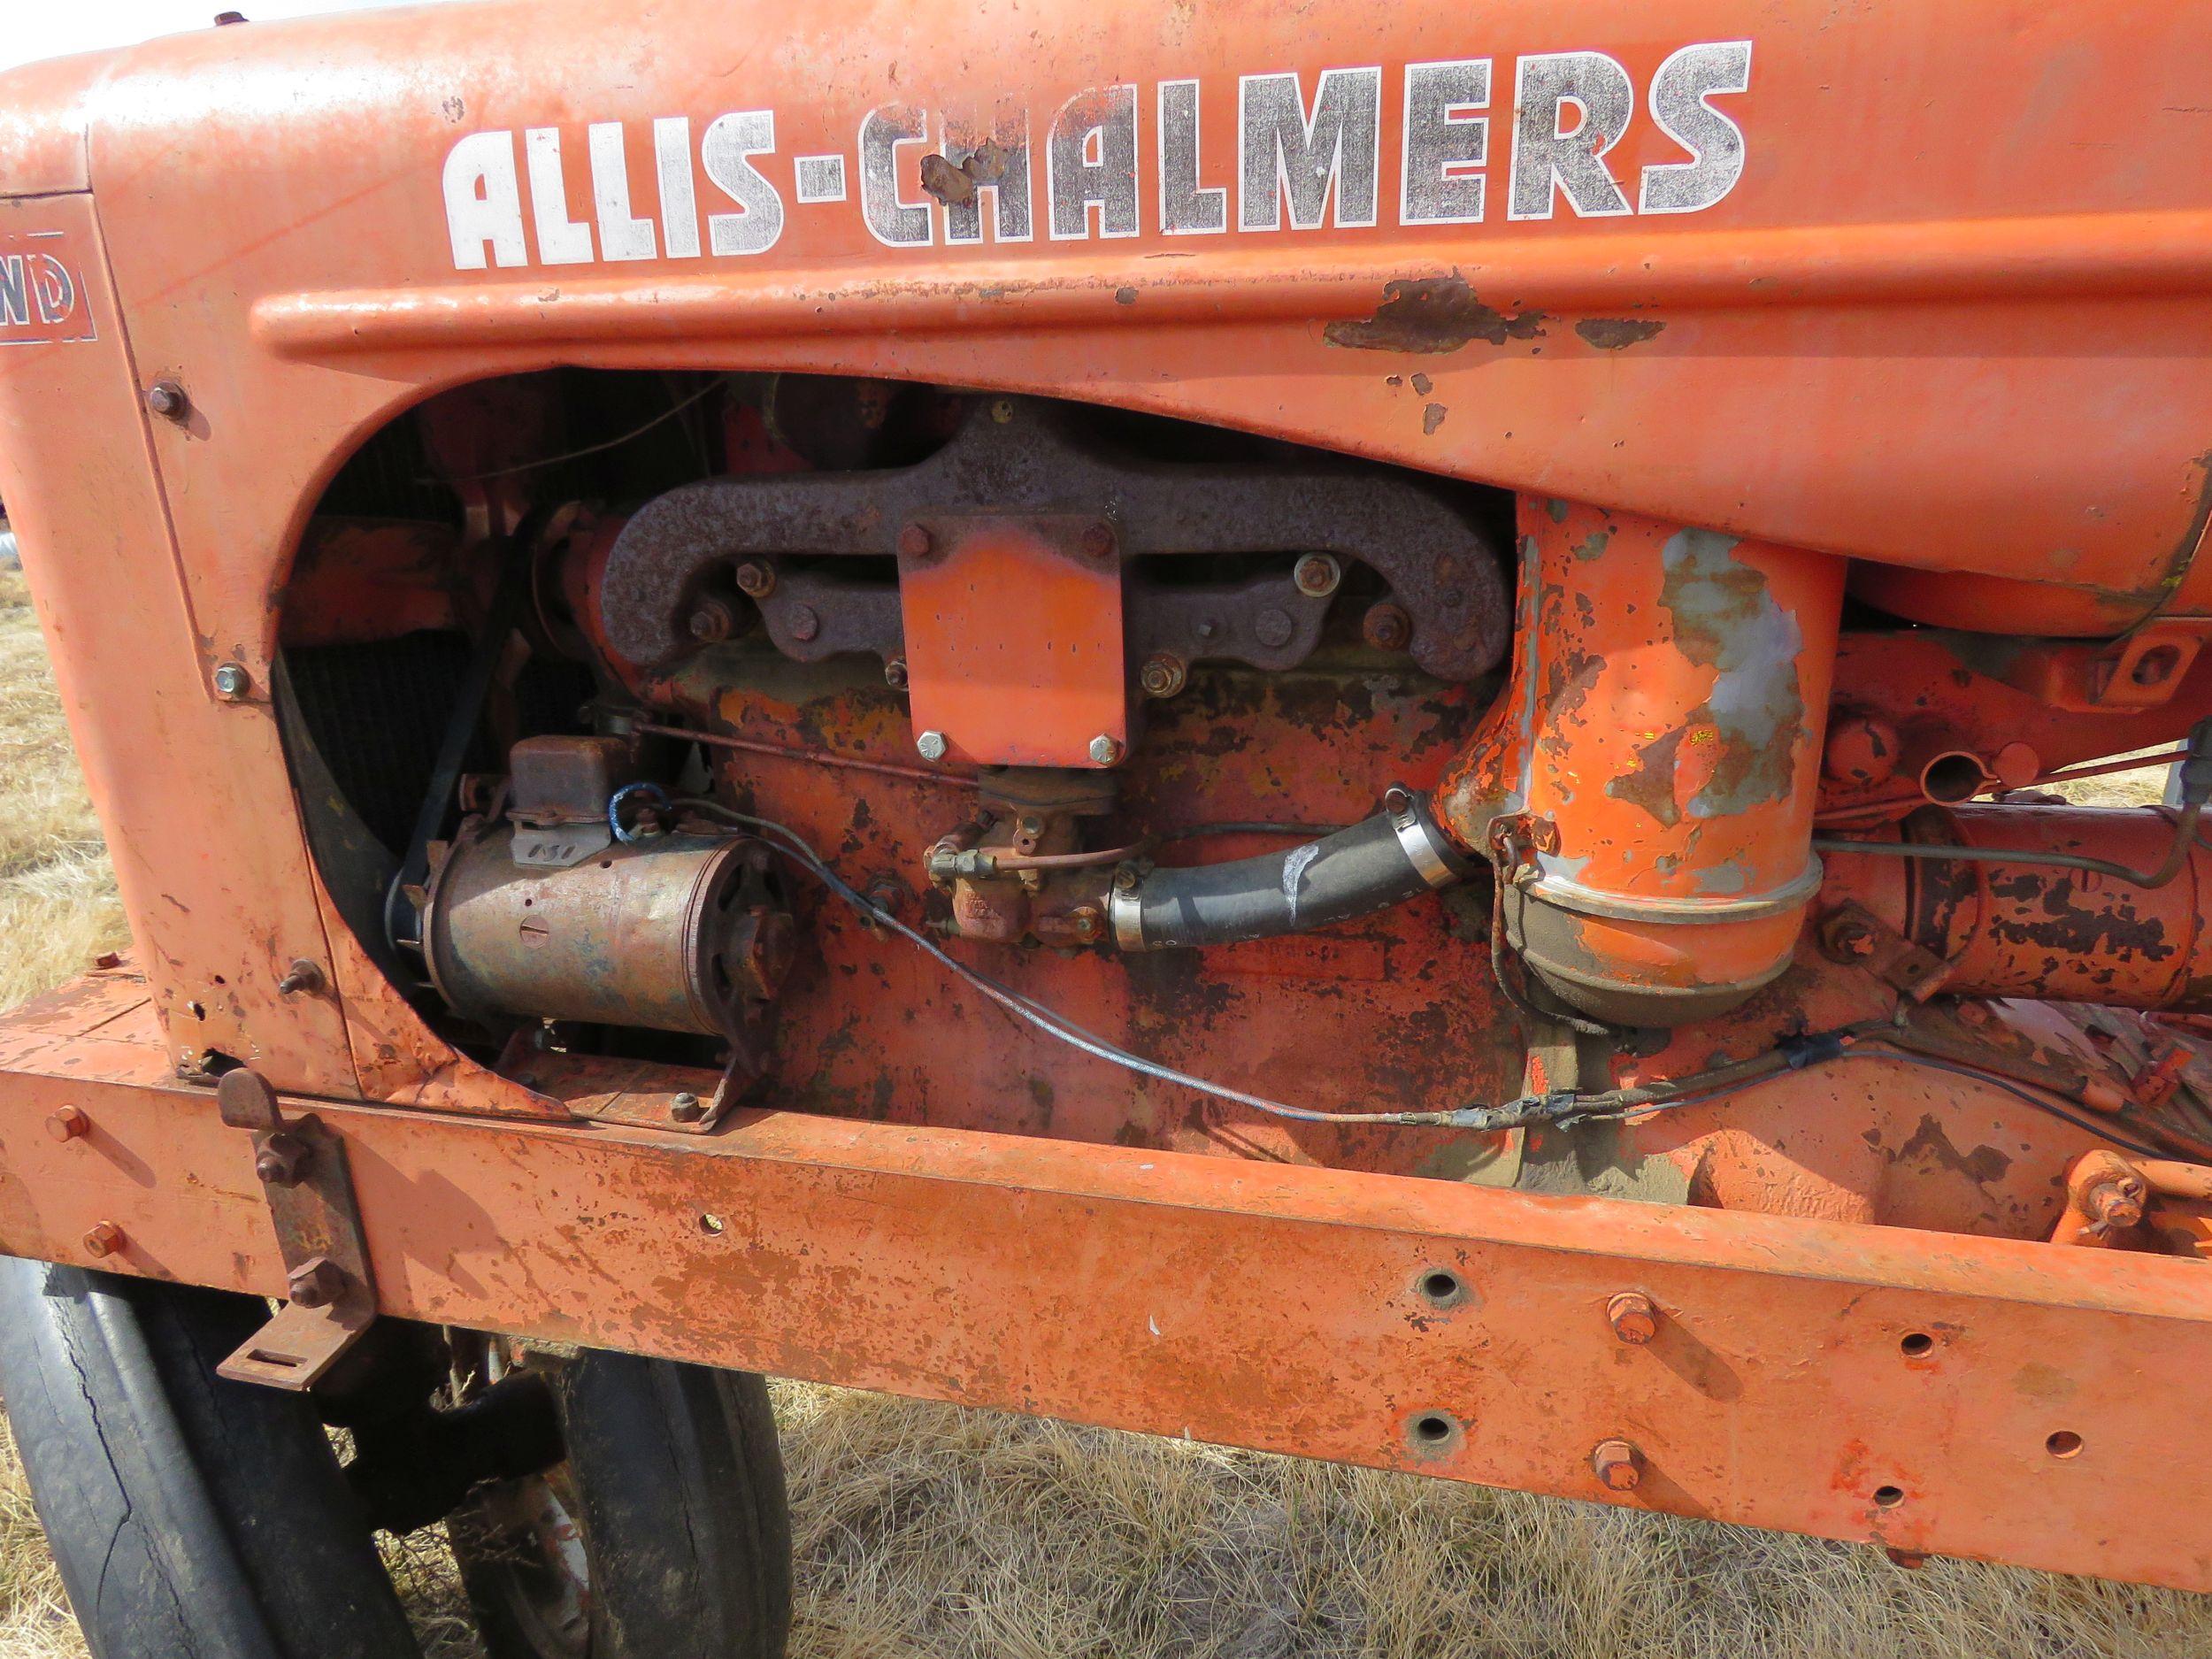 Allis Chalmers WD-45 Tractor